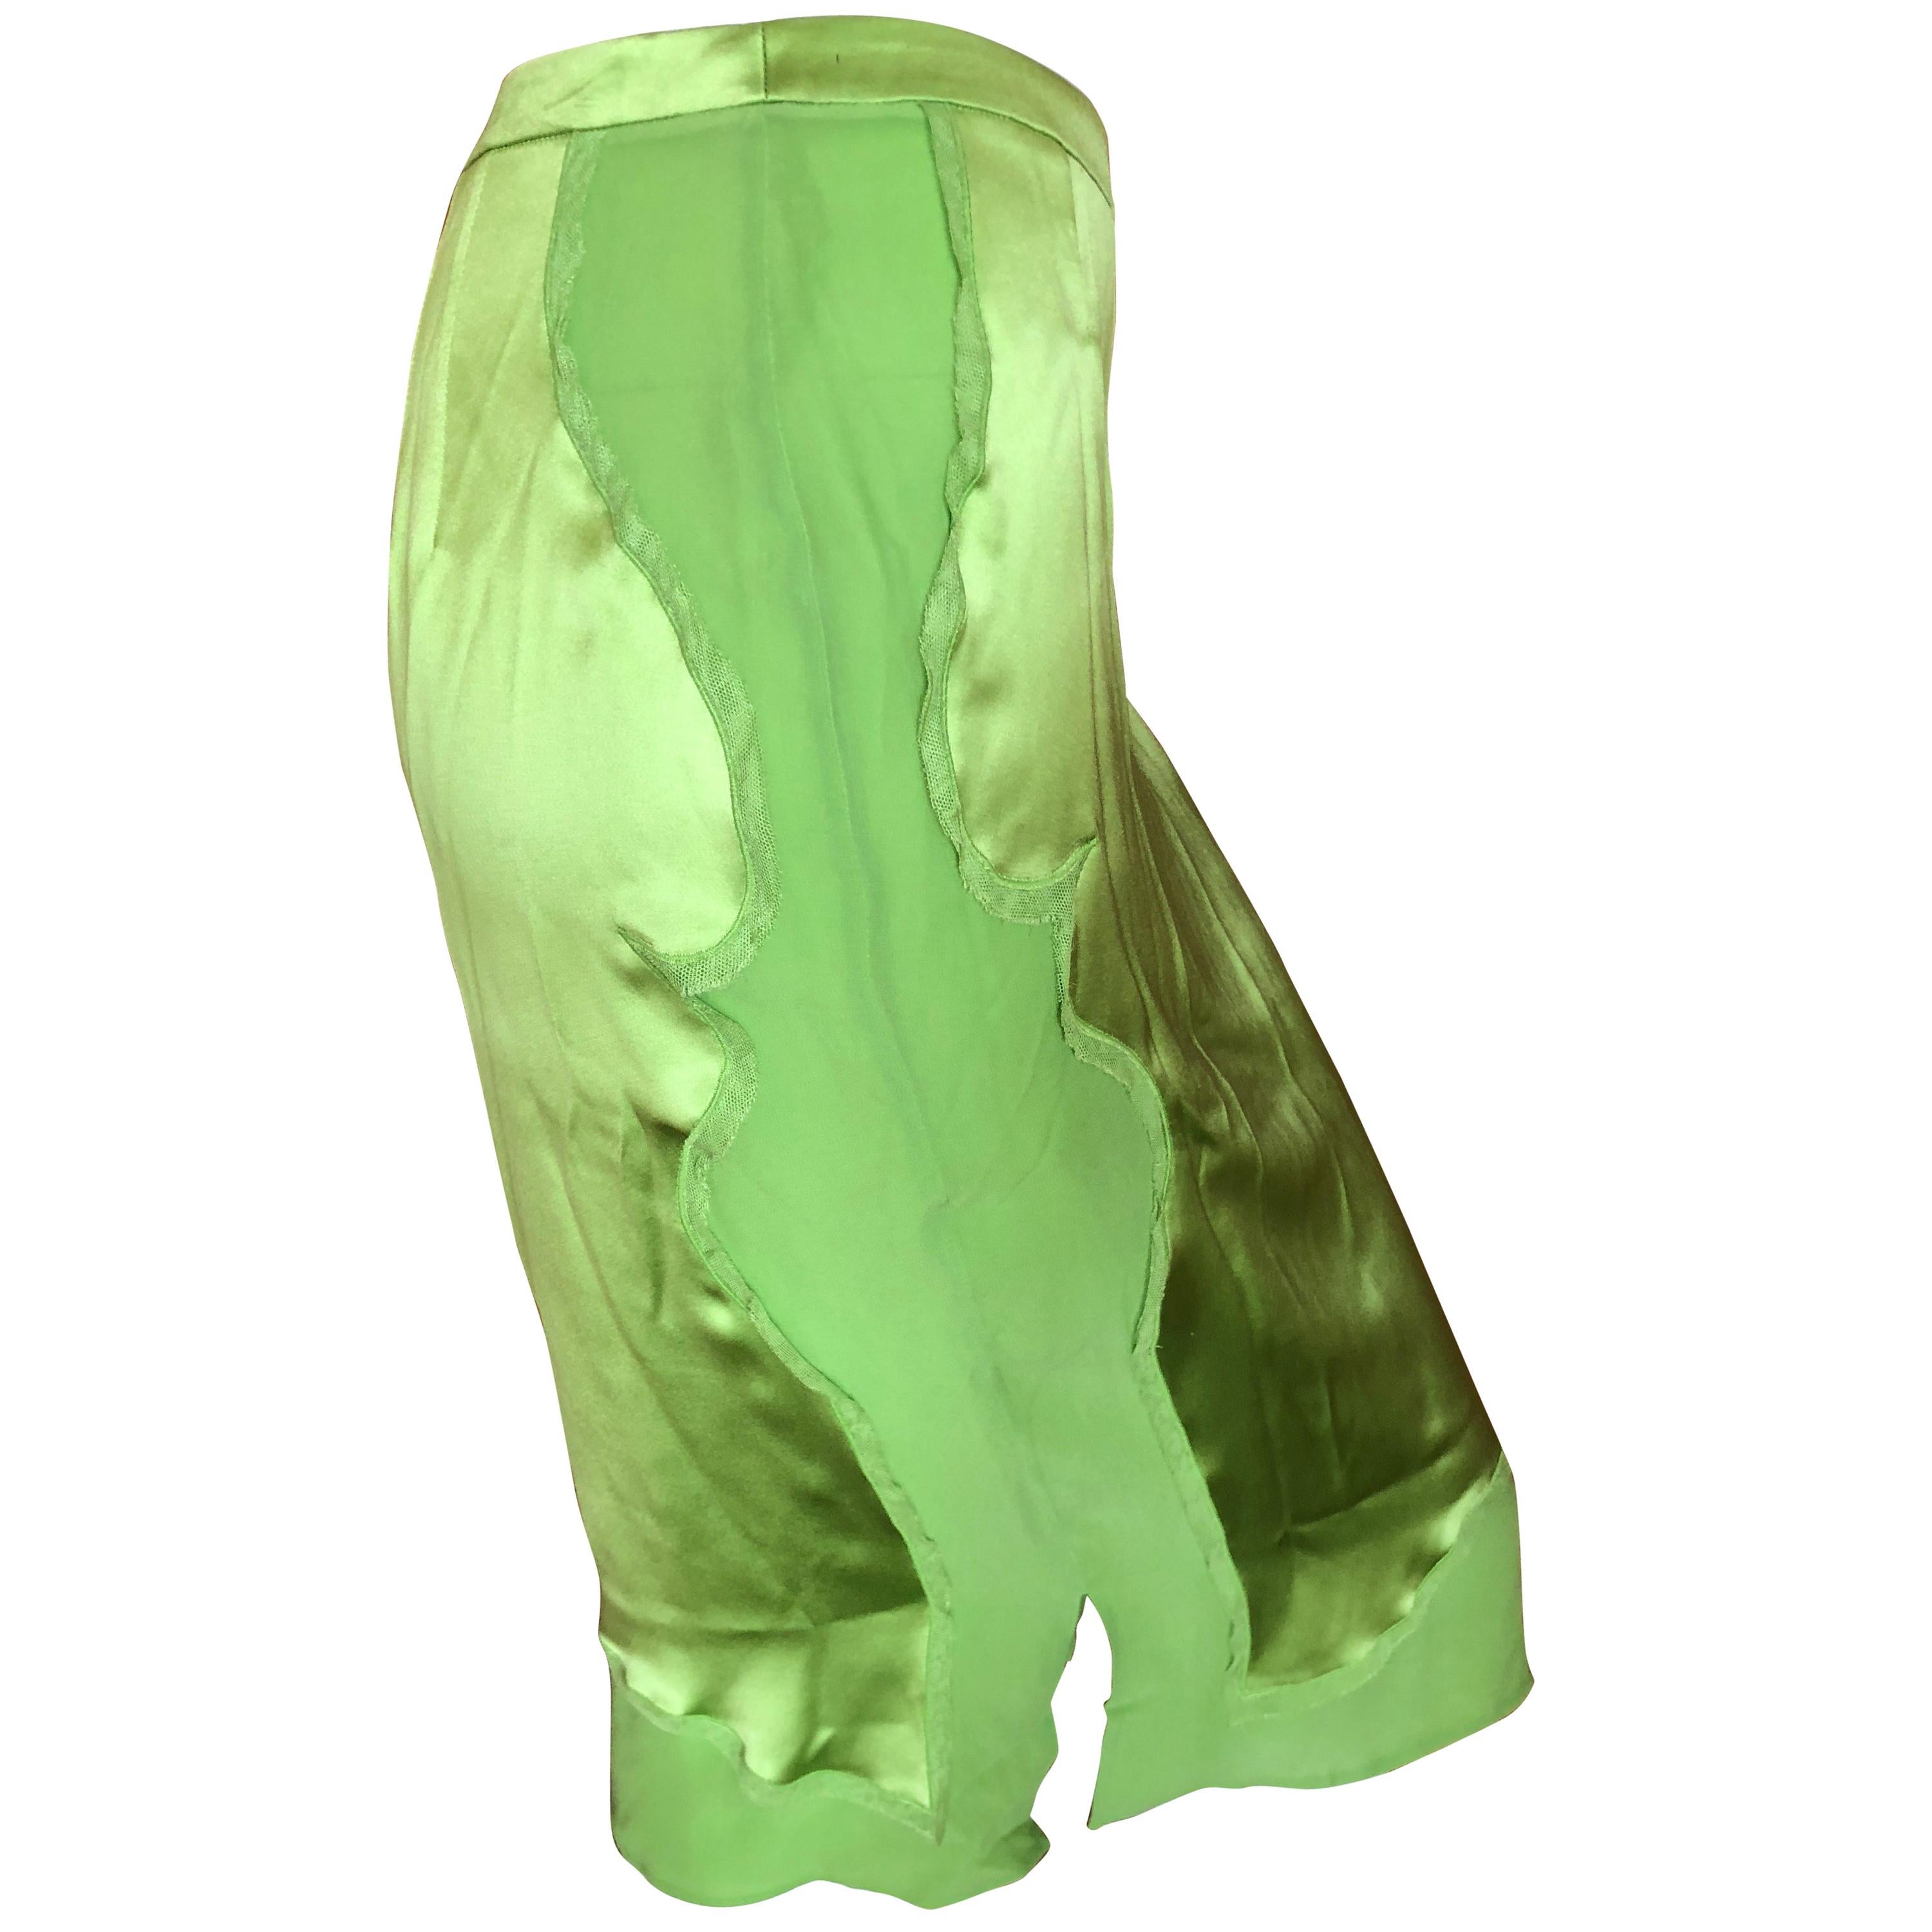 Yves Saint Laurent by Tom Ford 2004 Bright Green Silk Skirt New with Tags Sz 38 For Sale